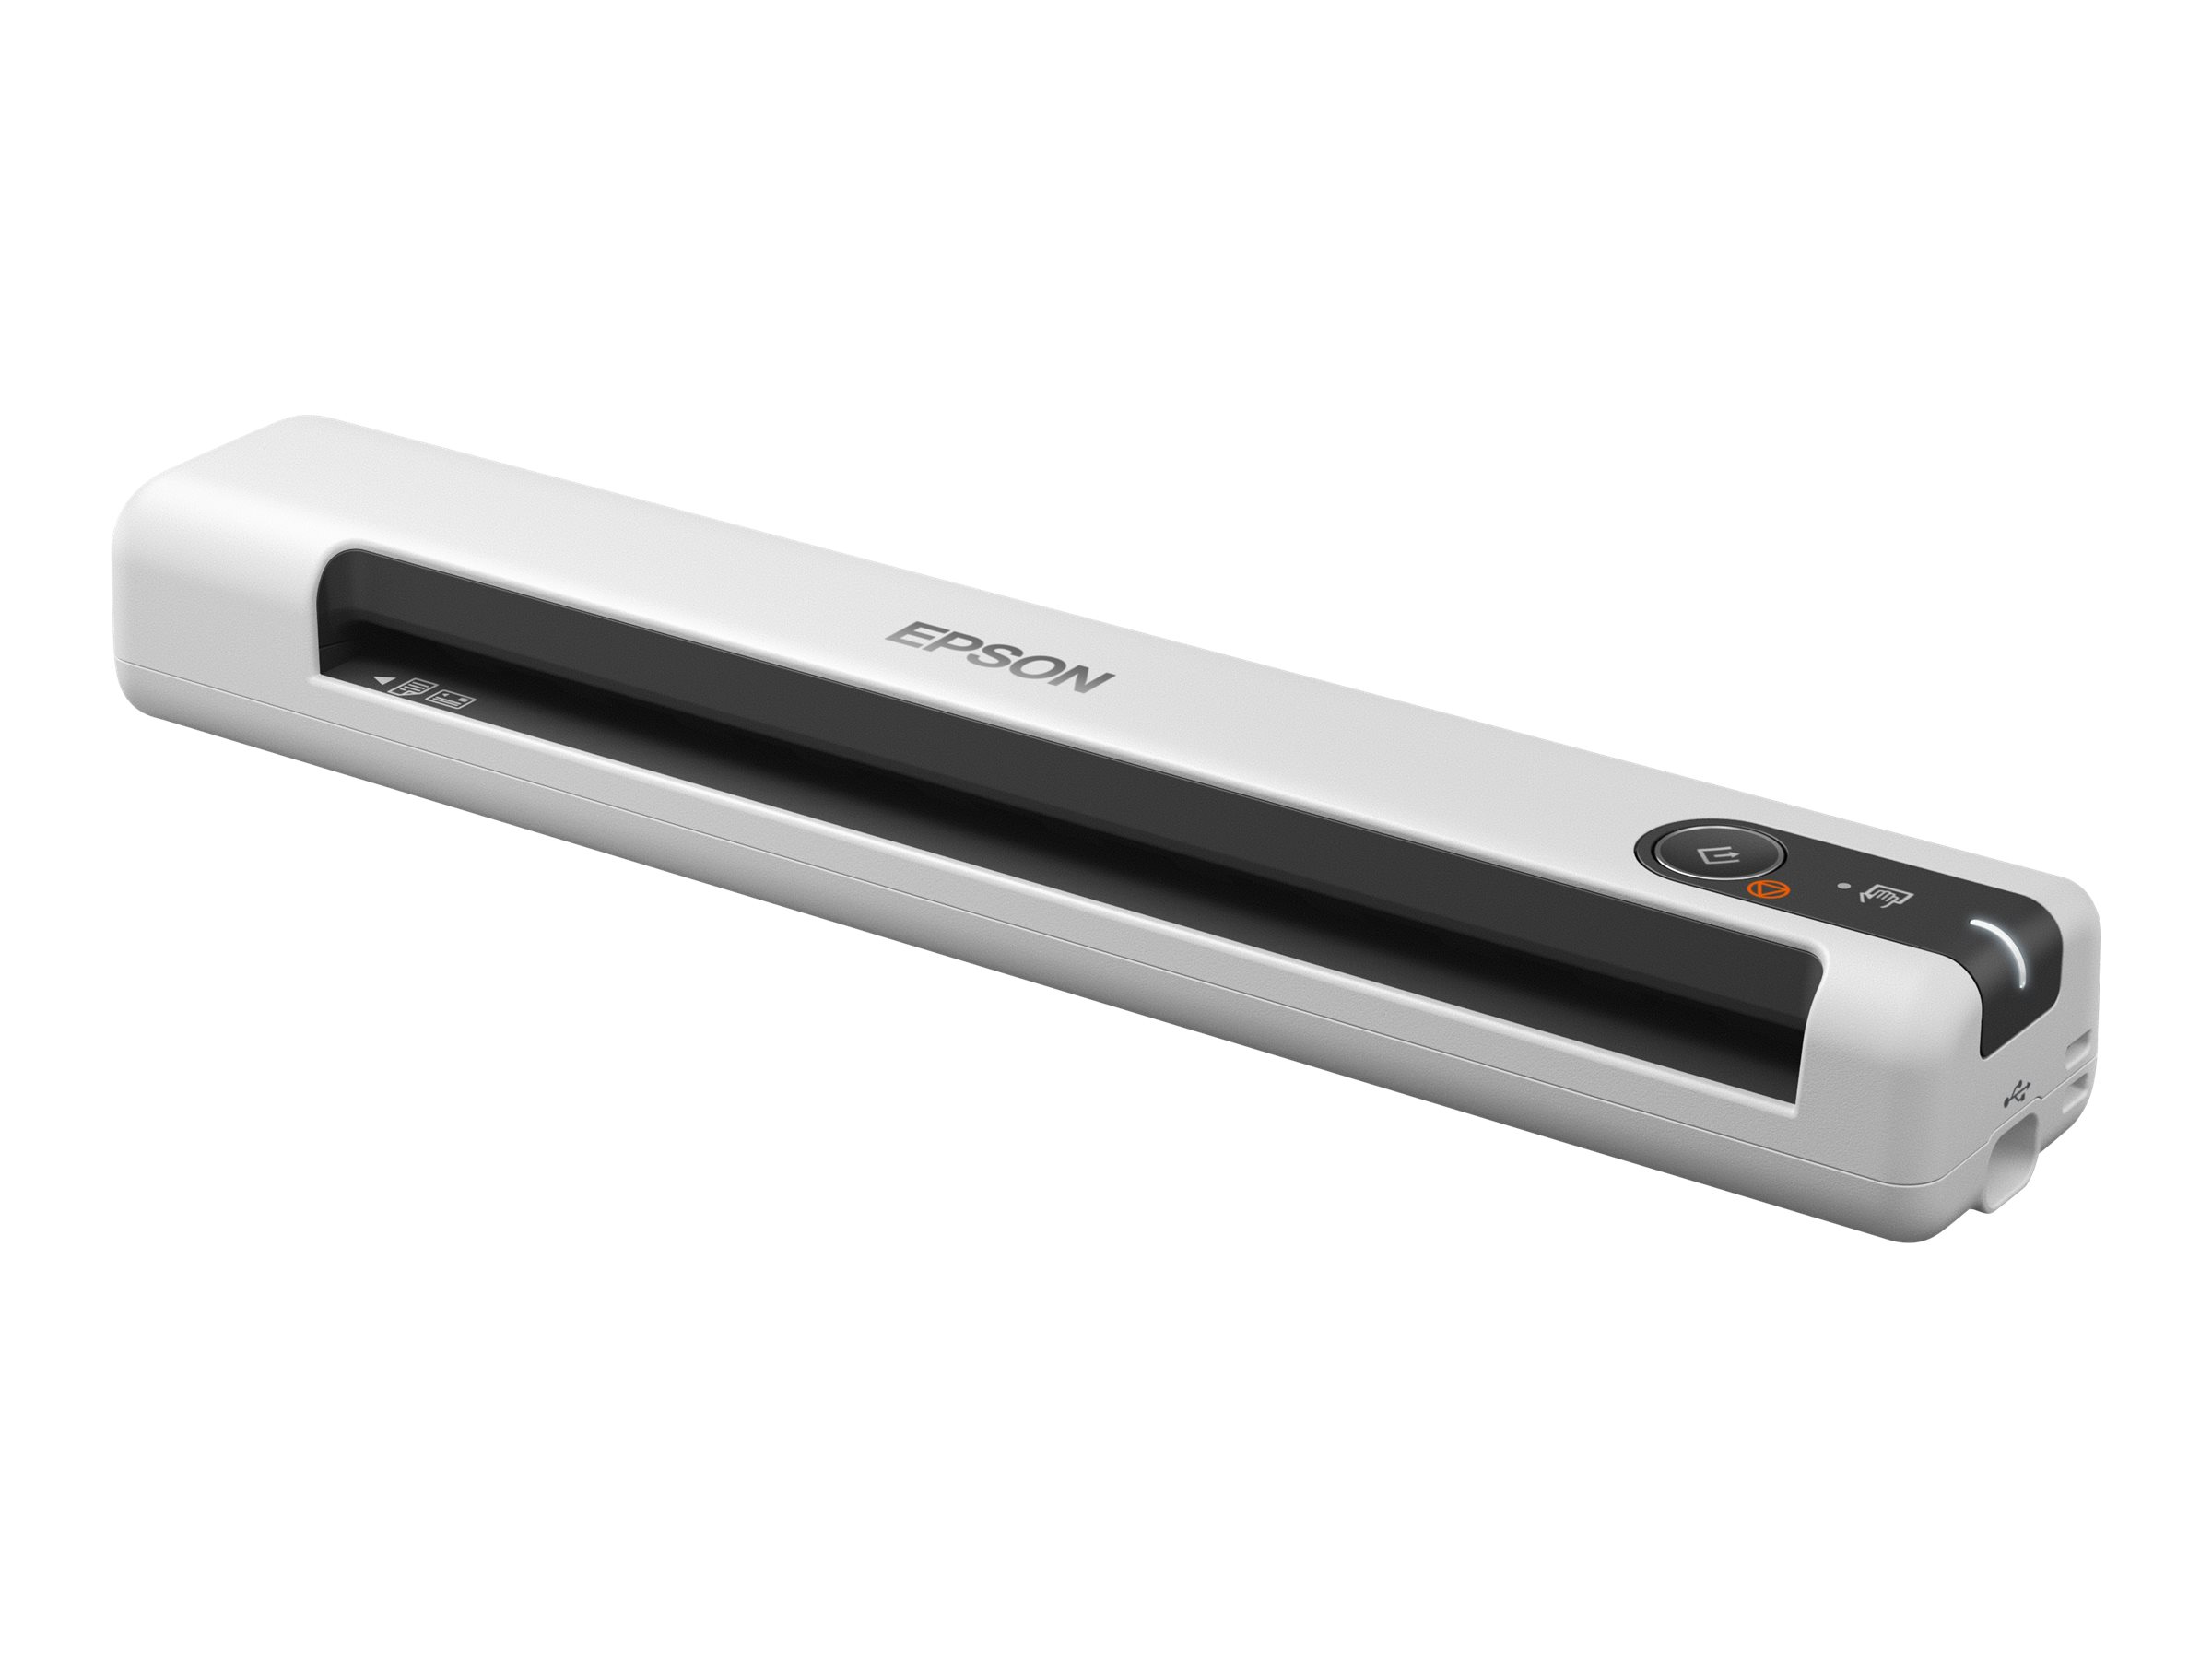 Epson DS-70 - Sheetfed scanner